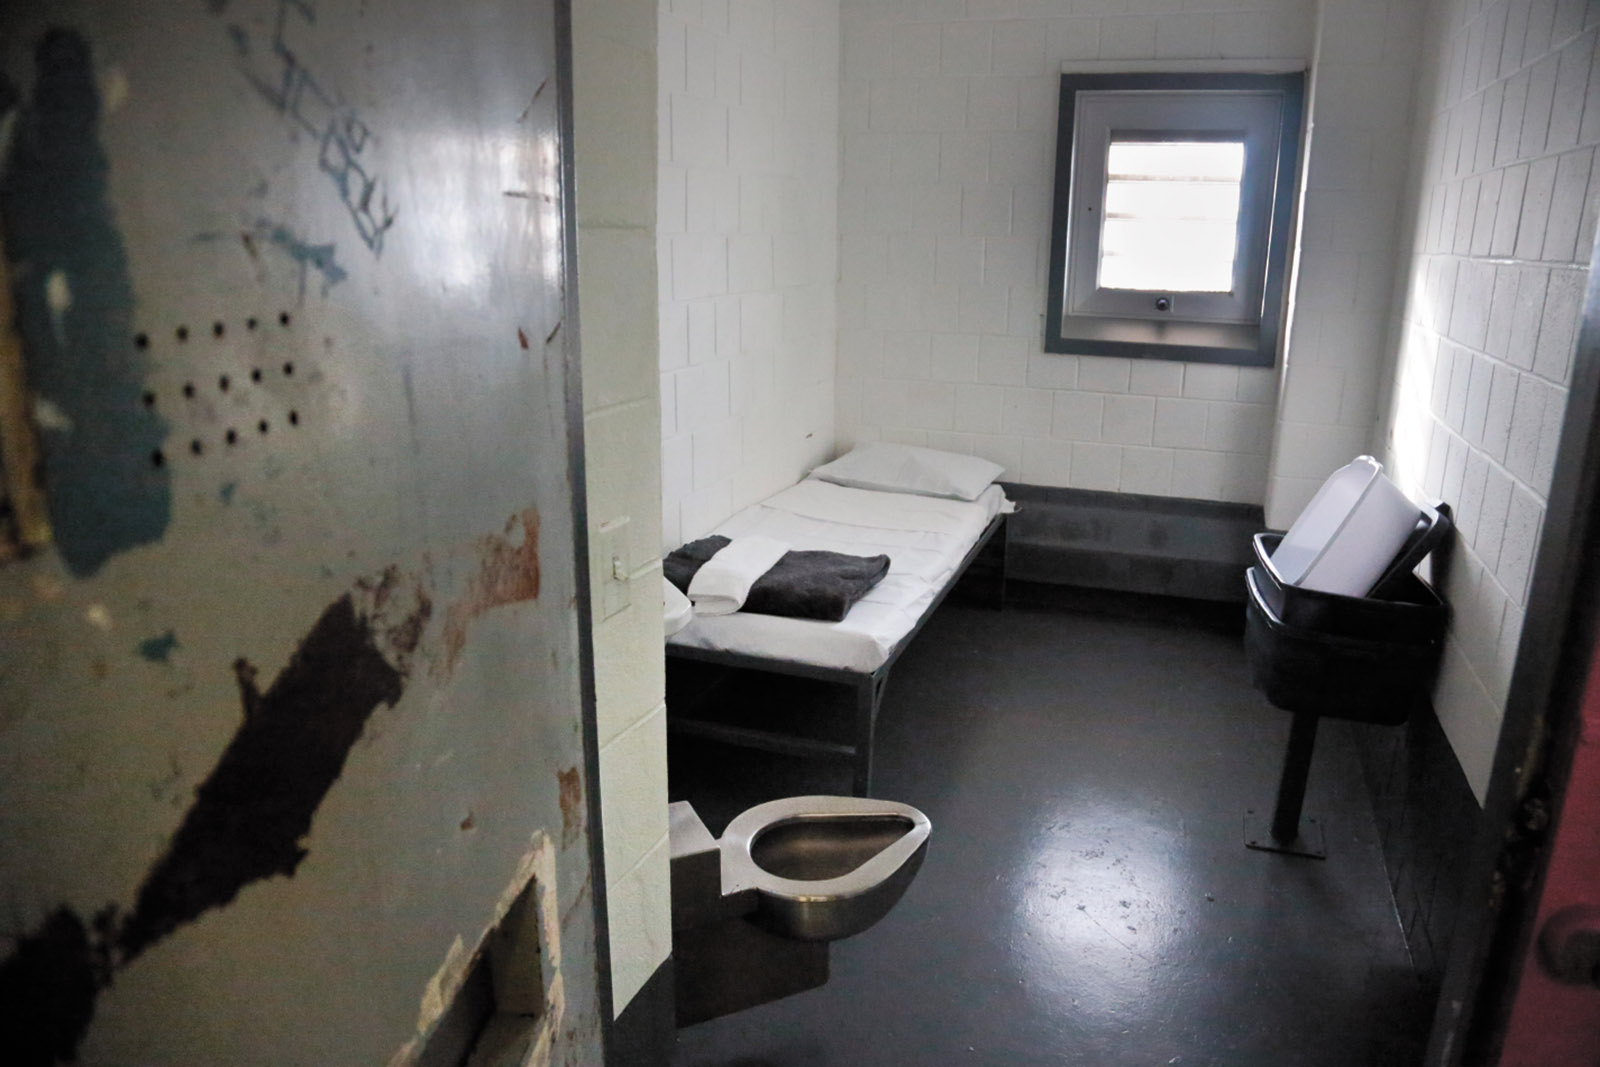 A solitary confinement cell at Rikers Island jail, New York City, January 2016